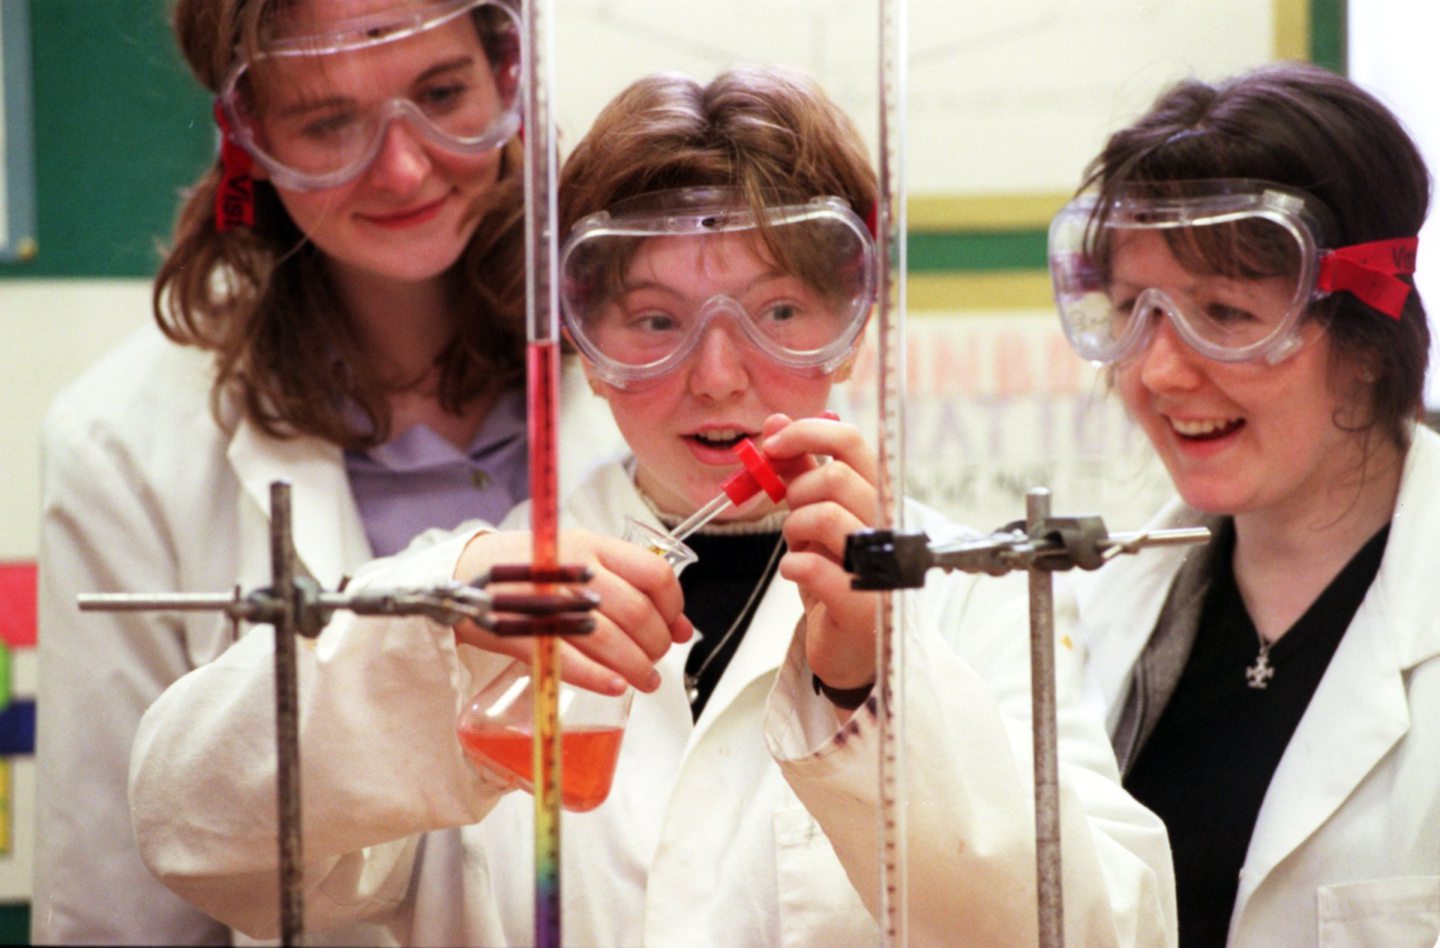 Pupils participating in a science class